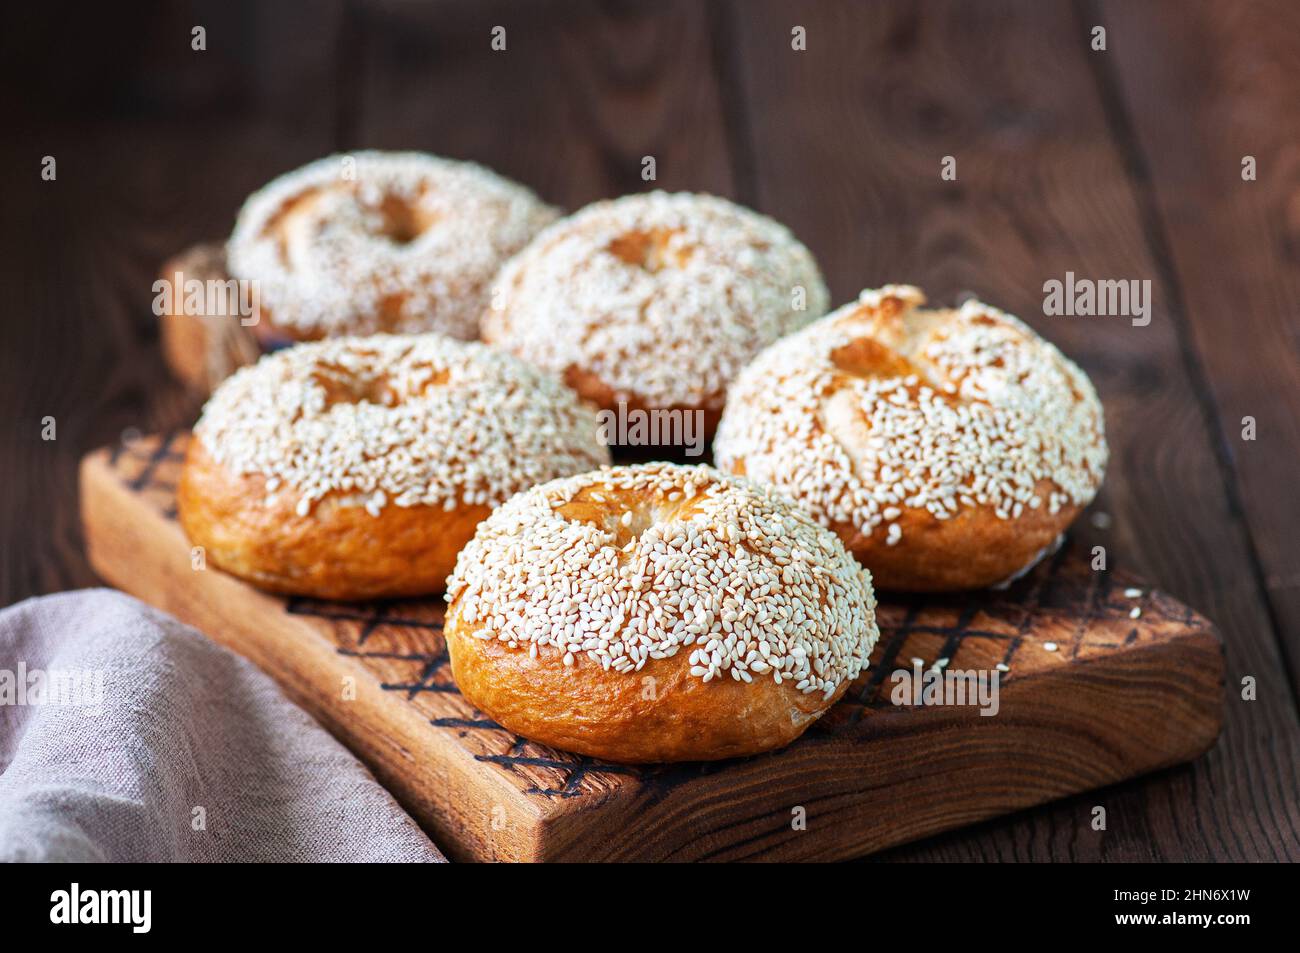 Freshly baked sesame seeded bagels on a wooden background. Stock Photo